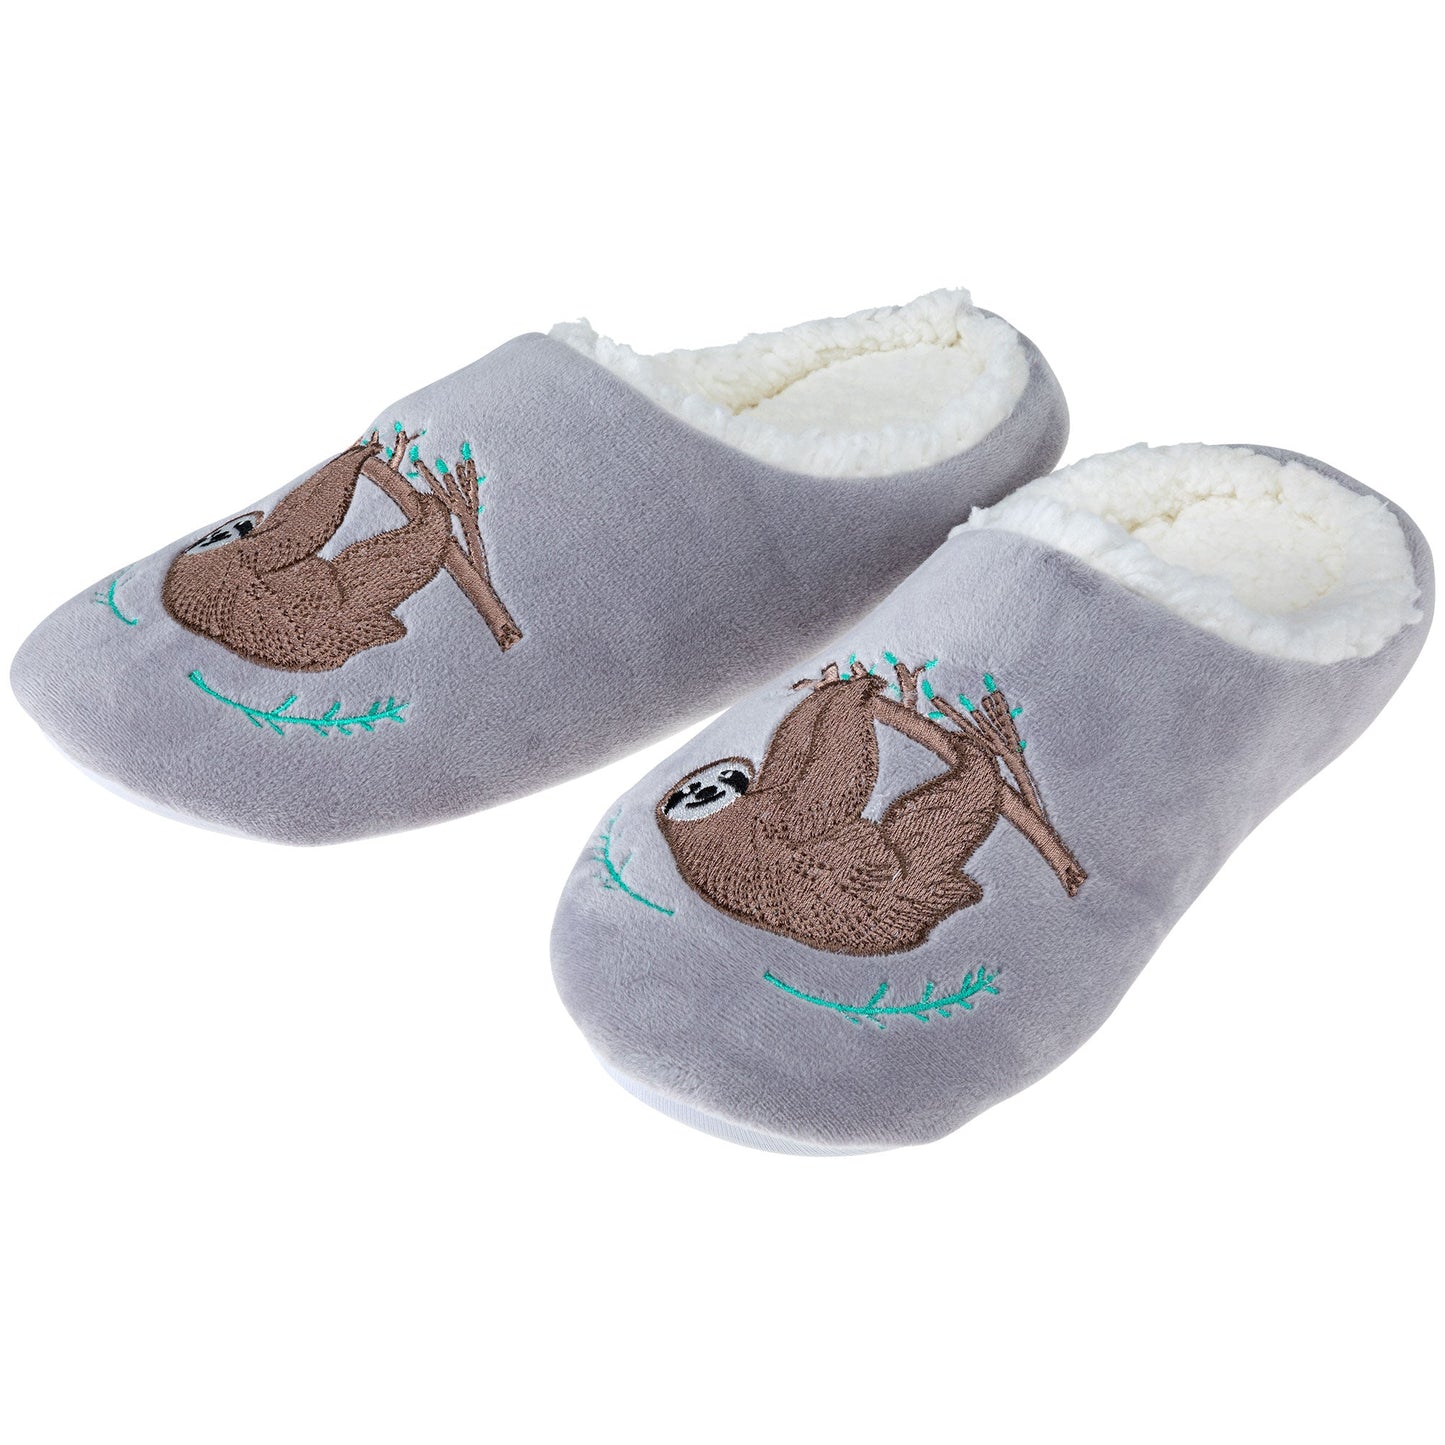 Wildly Adorable Slippers